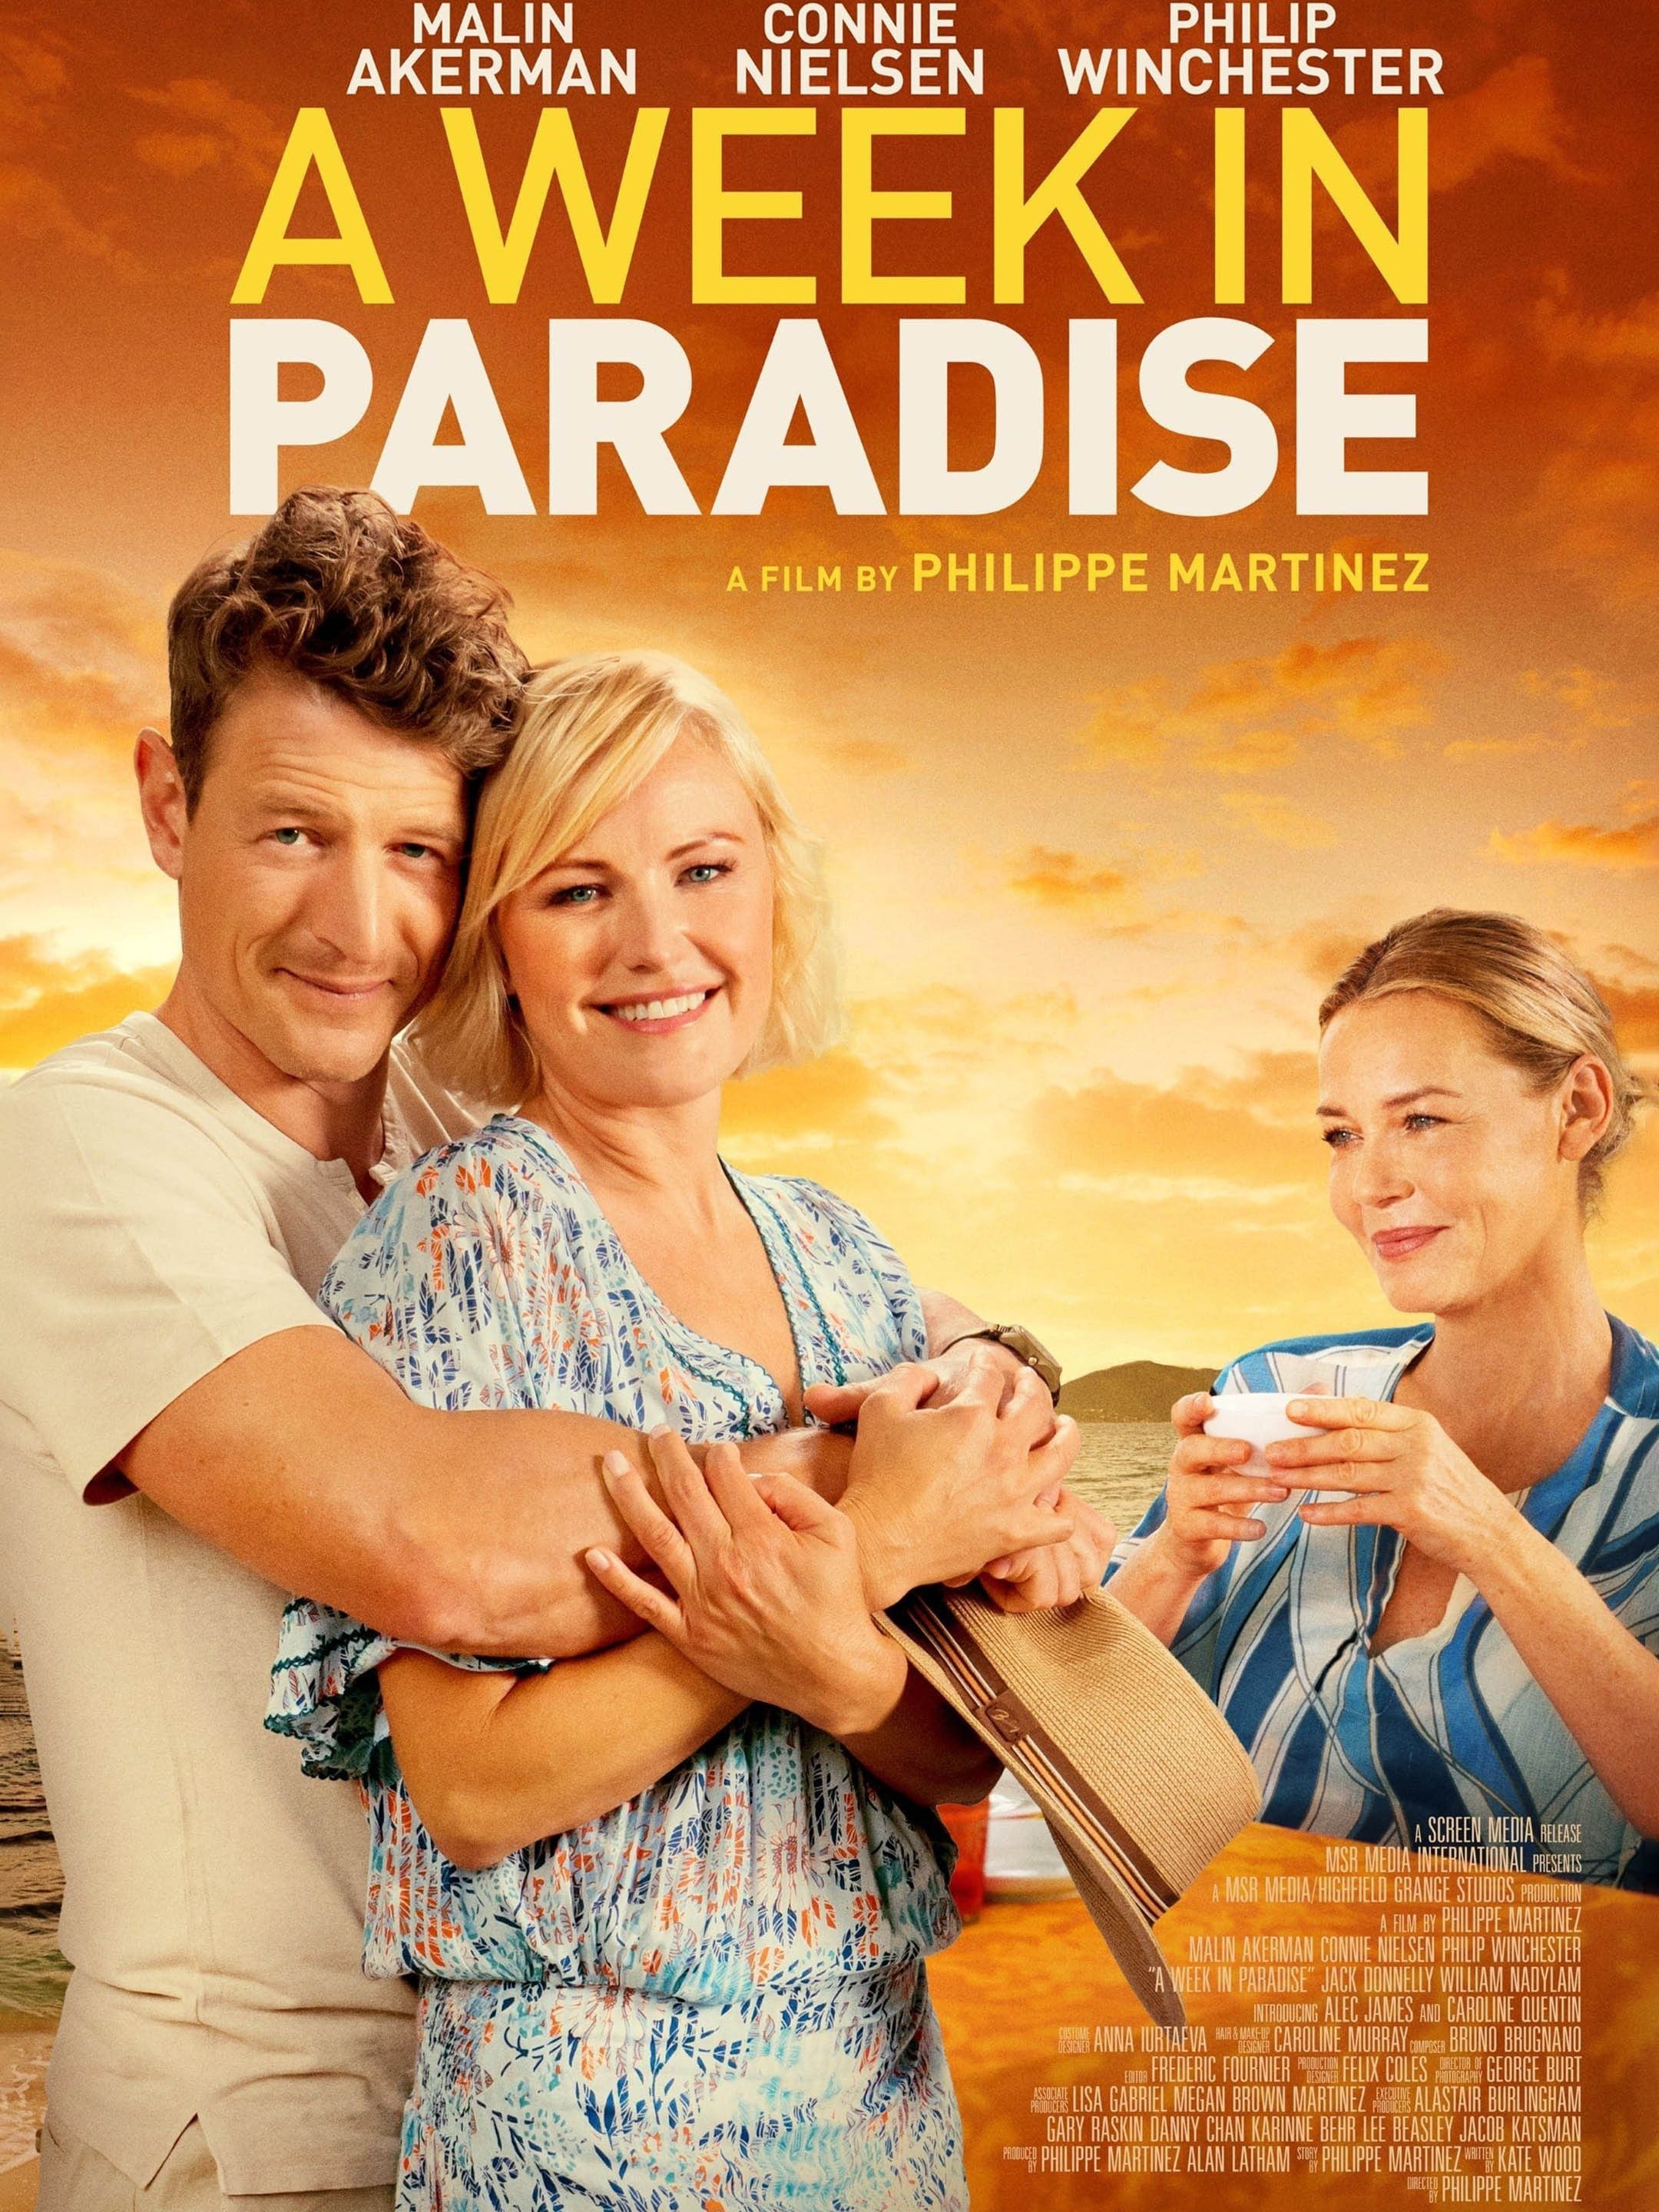 A Week in Paradise Trailer 1 Trailers & Videos Rotten Tomatoes